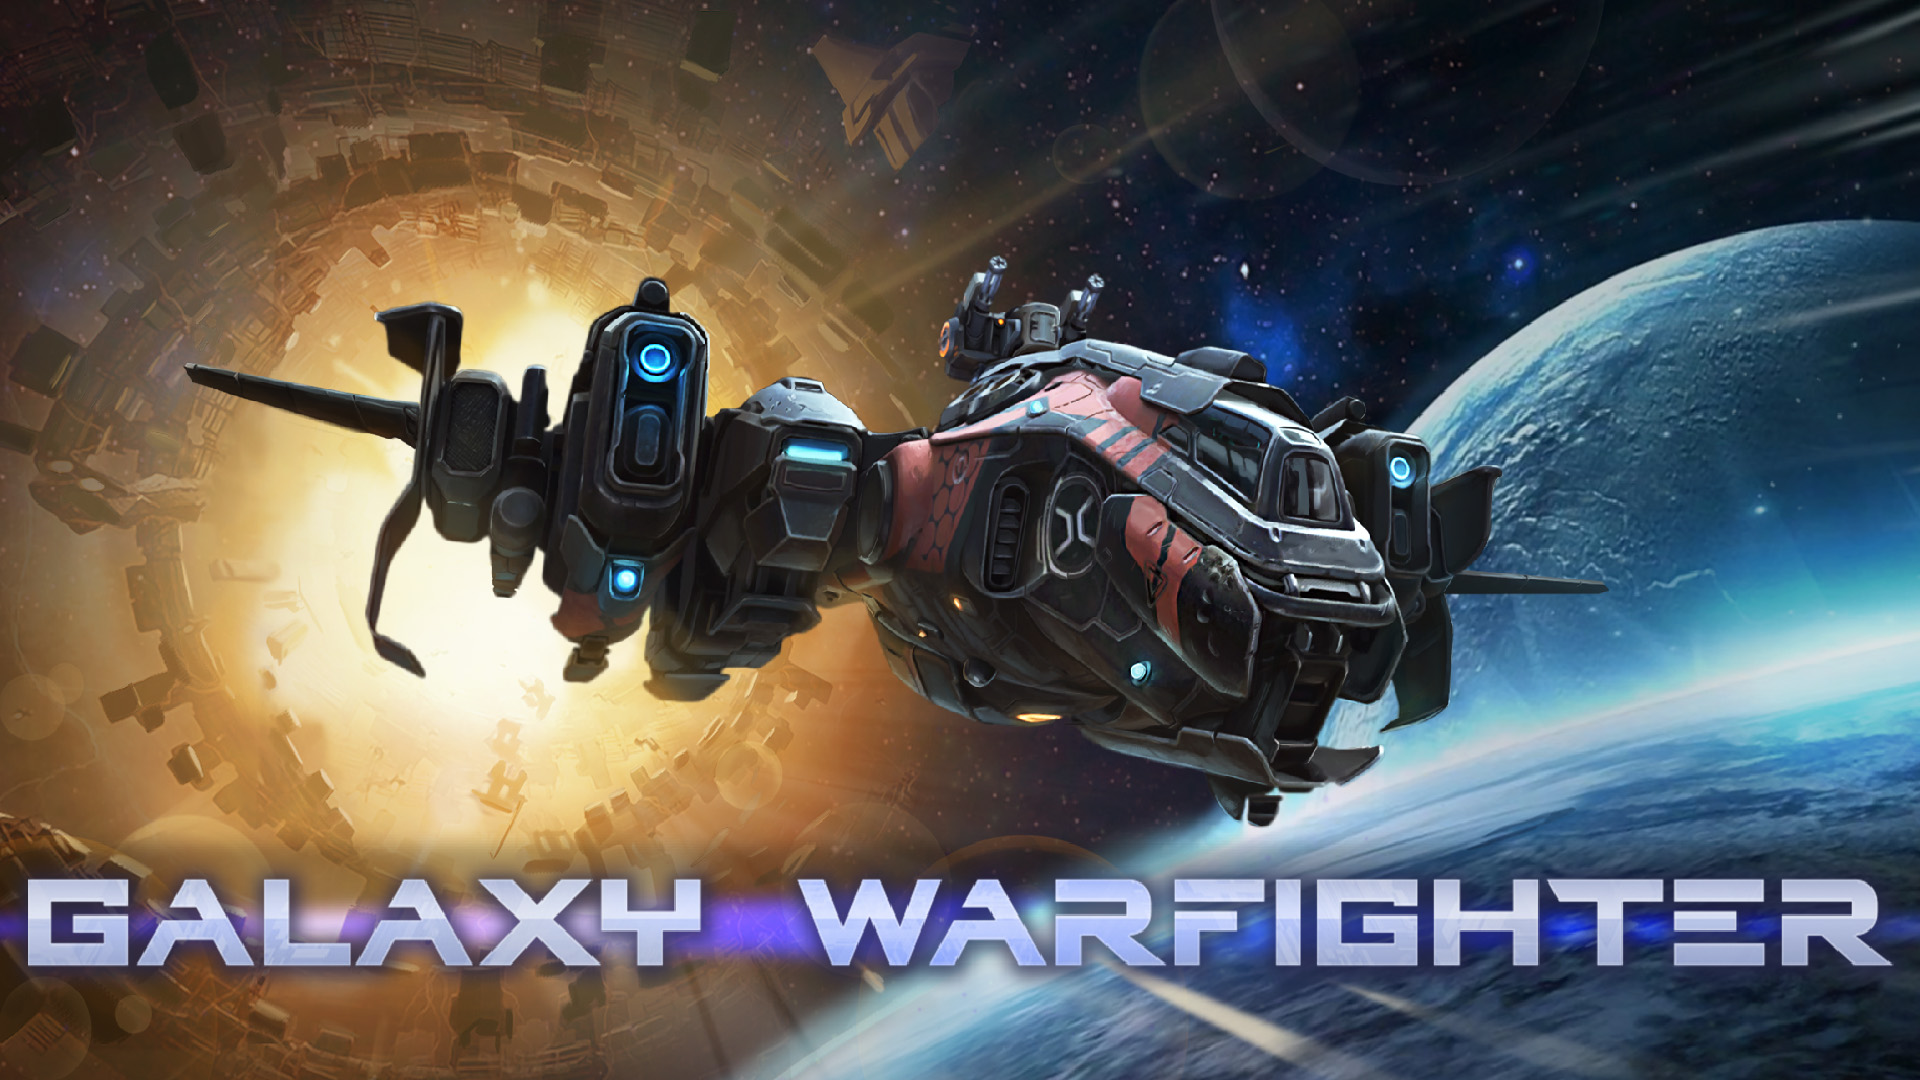 Retro Space Shoot’em Up Galaxy Warfighter Now Available On PC And Nintendo Switch